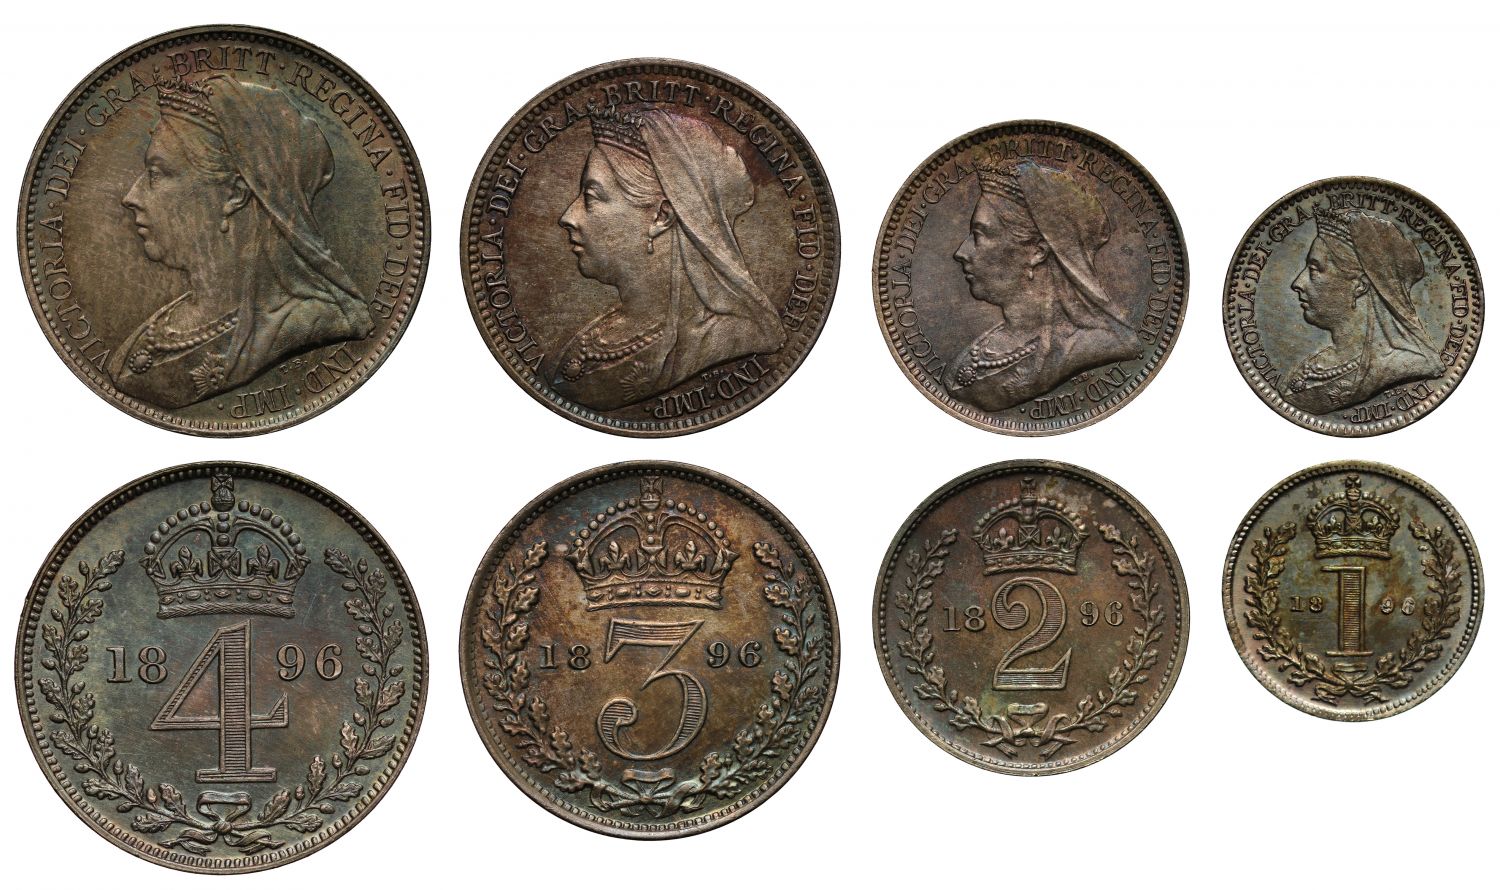 Victoria 1896 Maundy set in dated case of issue